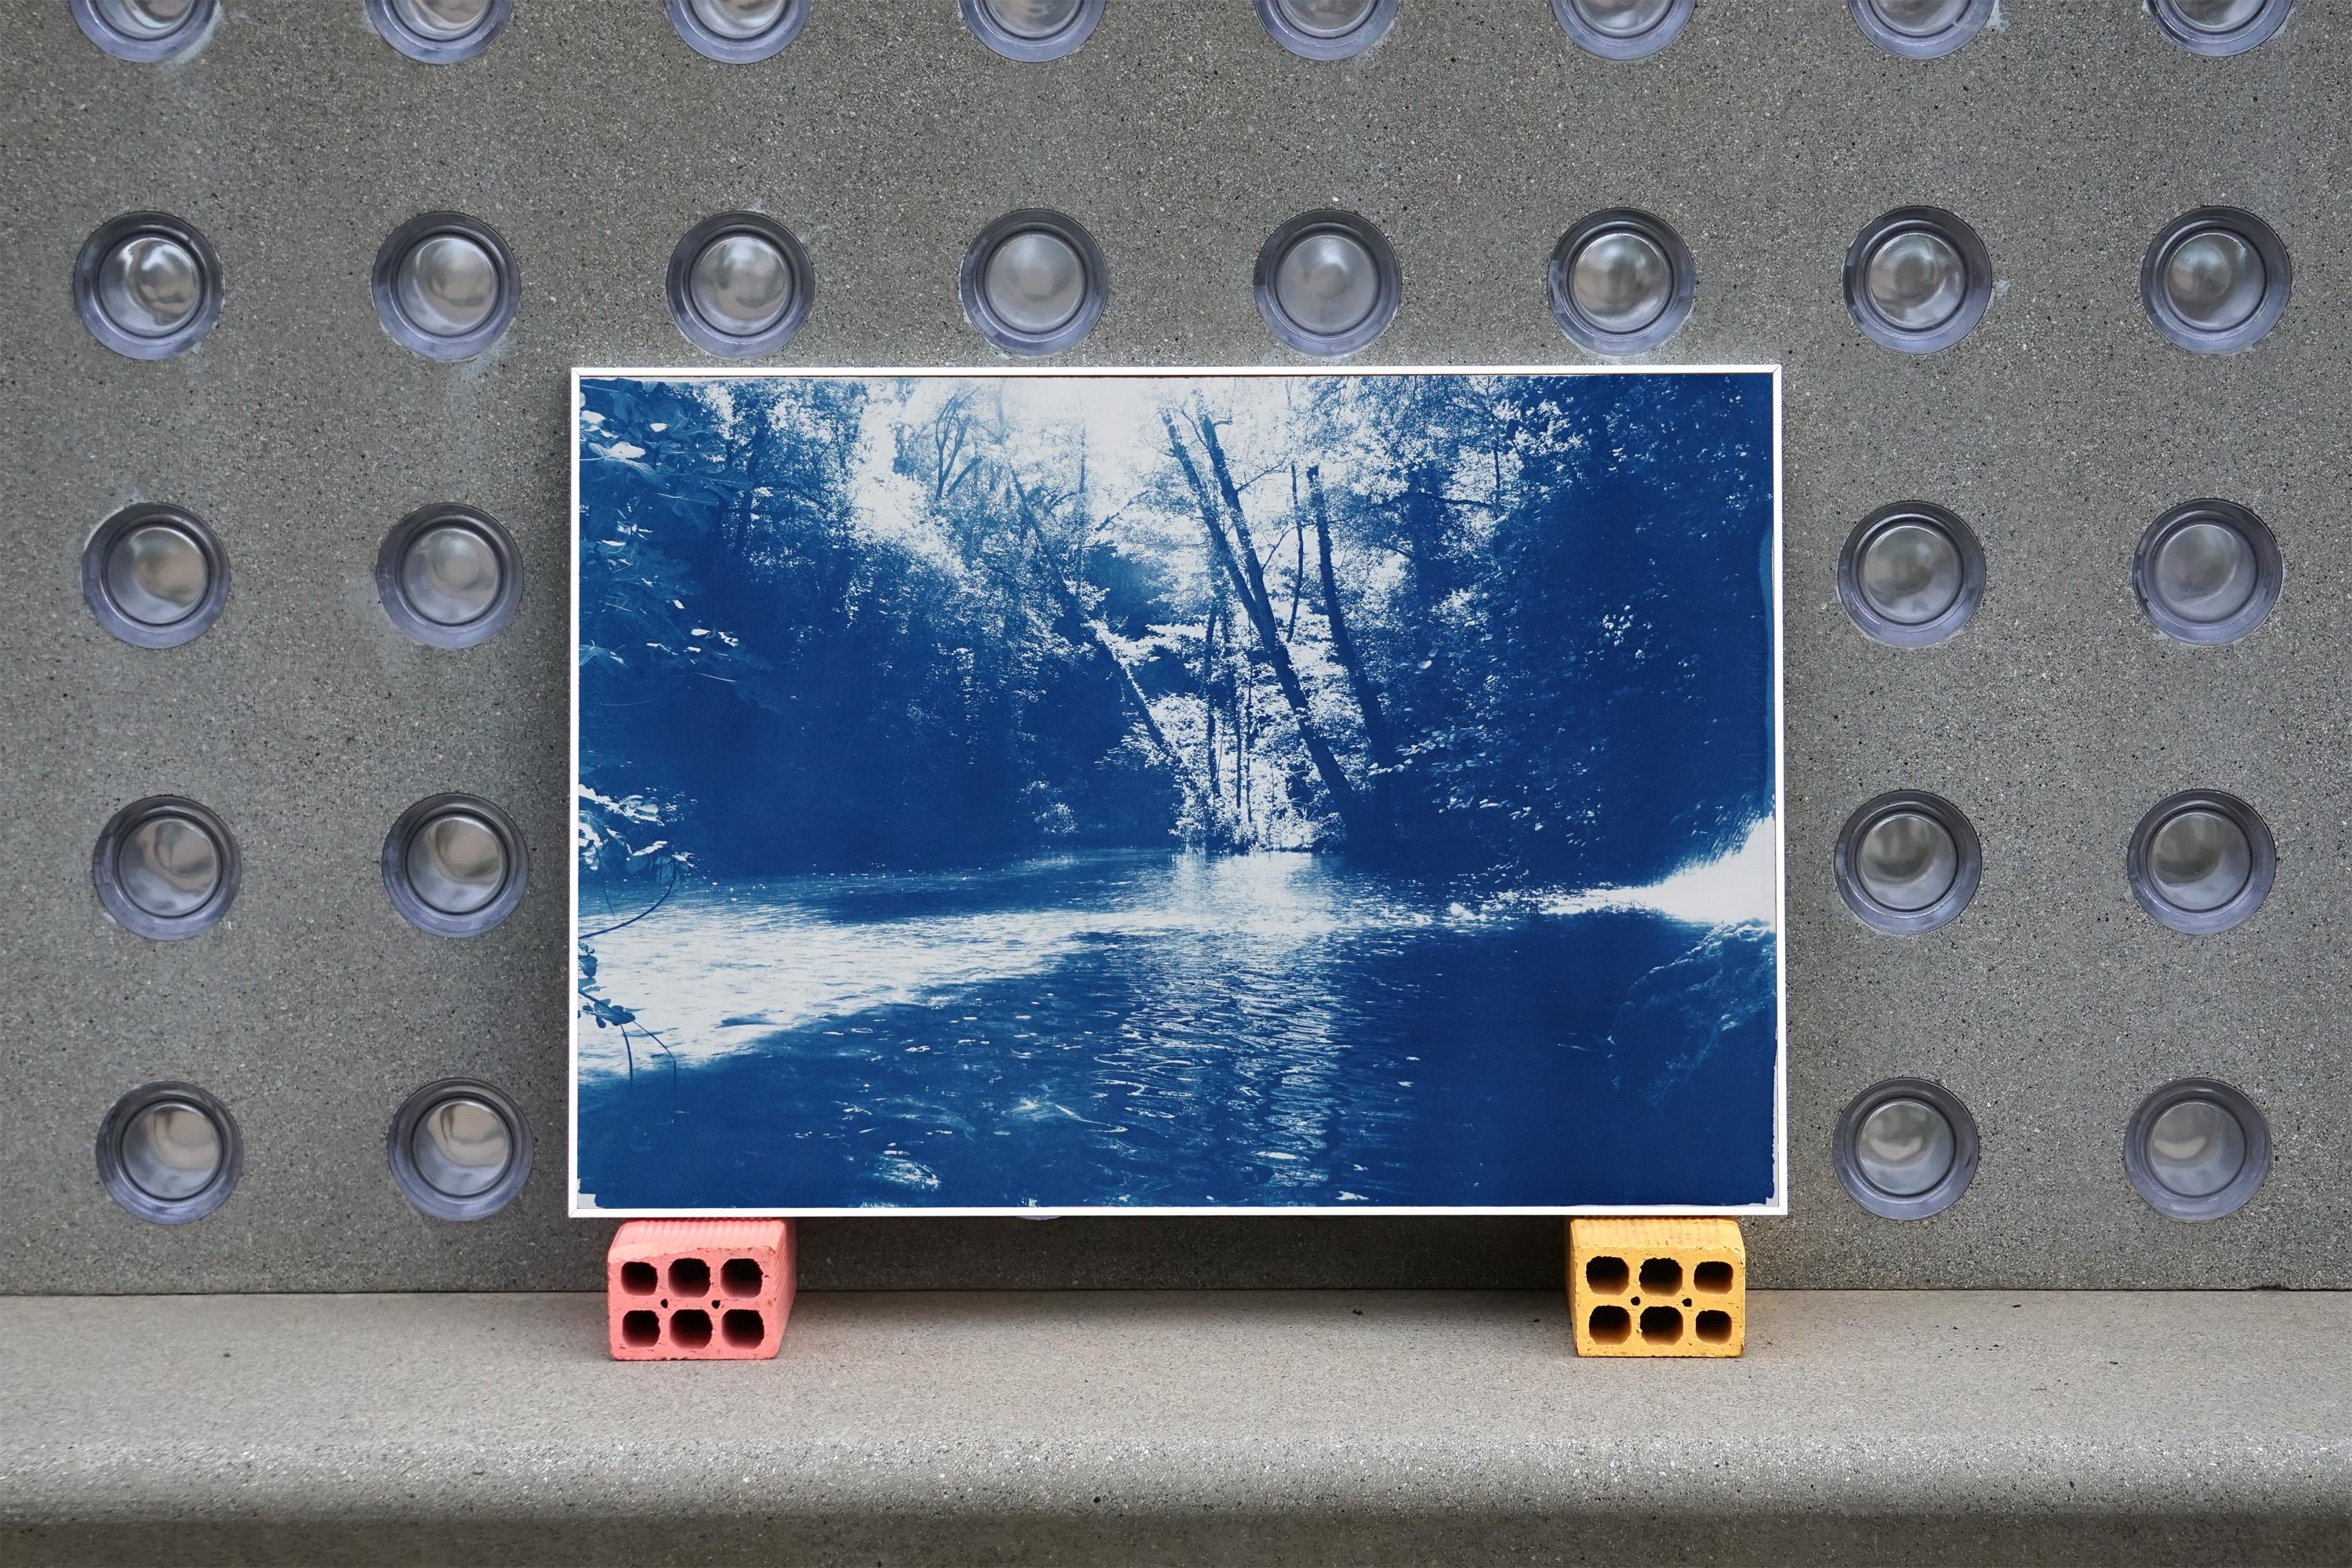 This is an exclusive handprinted limited edition cyanotype.
Lovely scene of a hidden pond in a Scandinavian forest.  

Details:
+ Title: Scandinavian Enchanted Forest
+ Year: 2022
+ Edition Size: 50
+ Stamped and Certificate of Authenticity